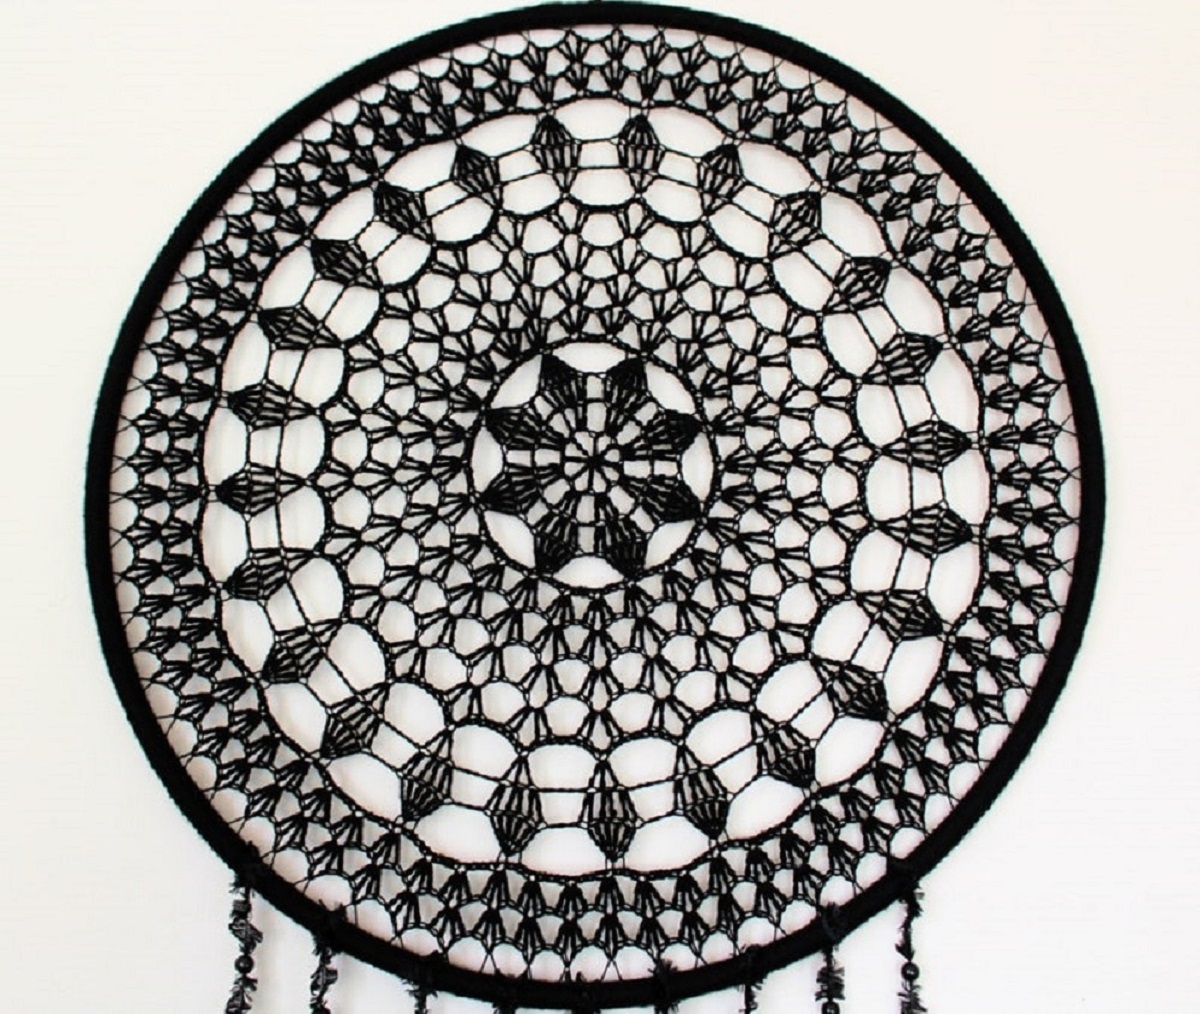 Large black dream catcher hanging on a wall with intricate crochet designs and black strings hanging from it.